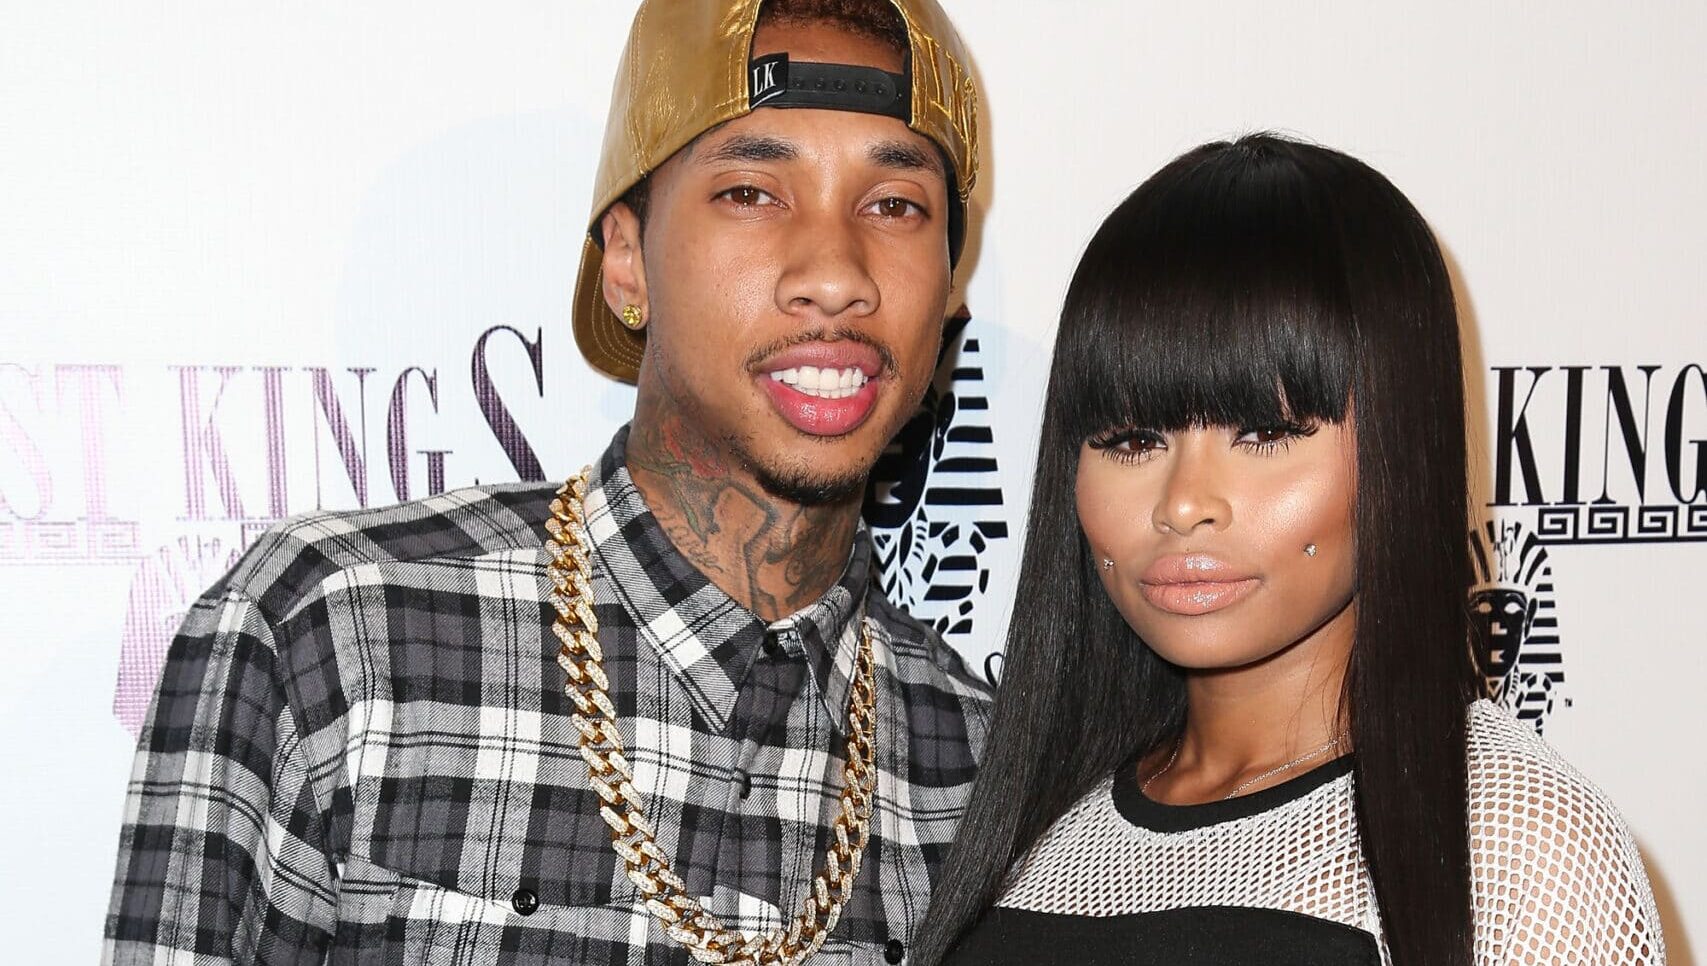 Rapper Tyga (L) and Blac Chyna attend the exclusive press preview of Tyga's new store, Last Kings Flagship Store, on February 20, 2014 in Los Angeles, California.